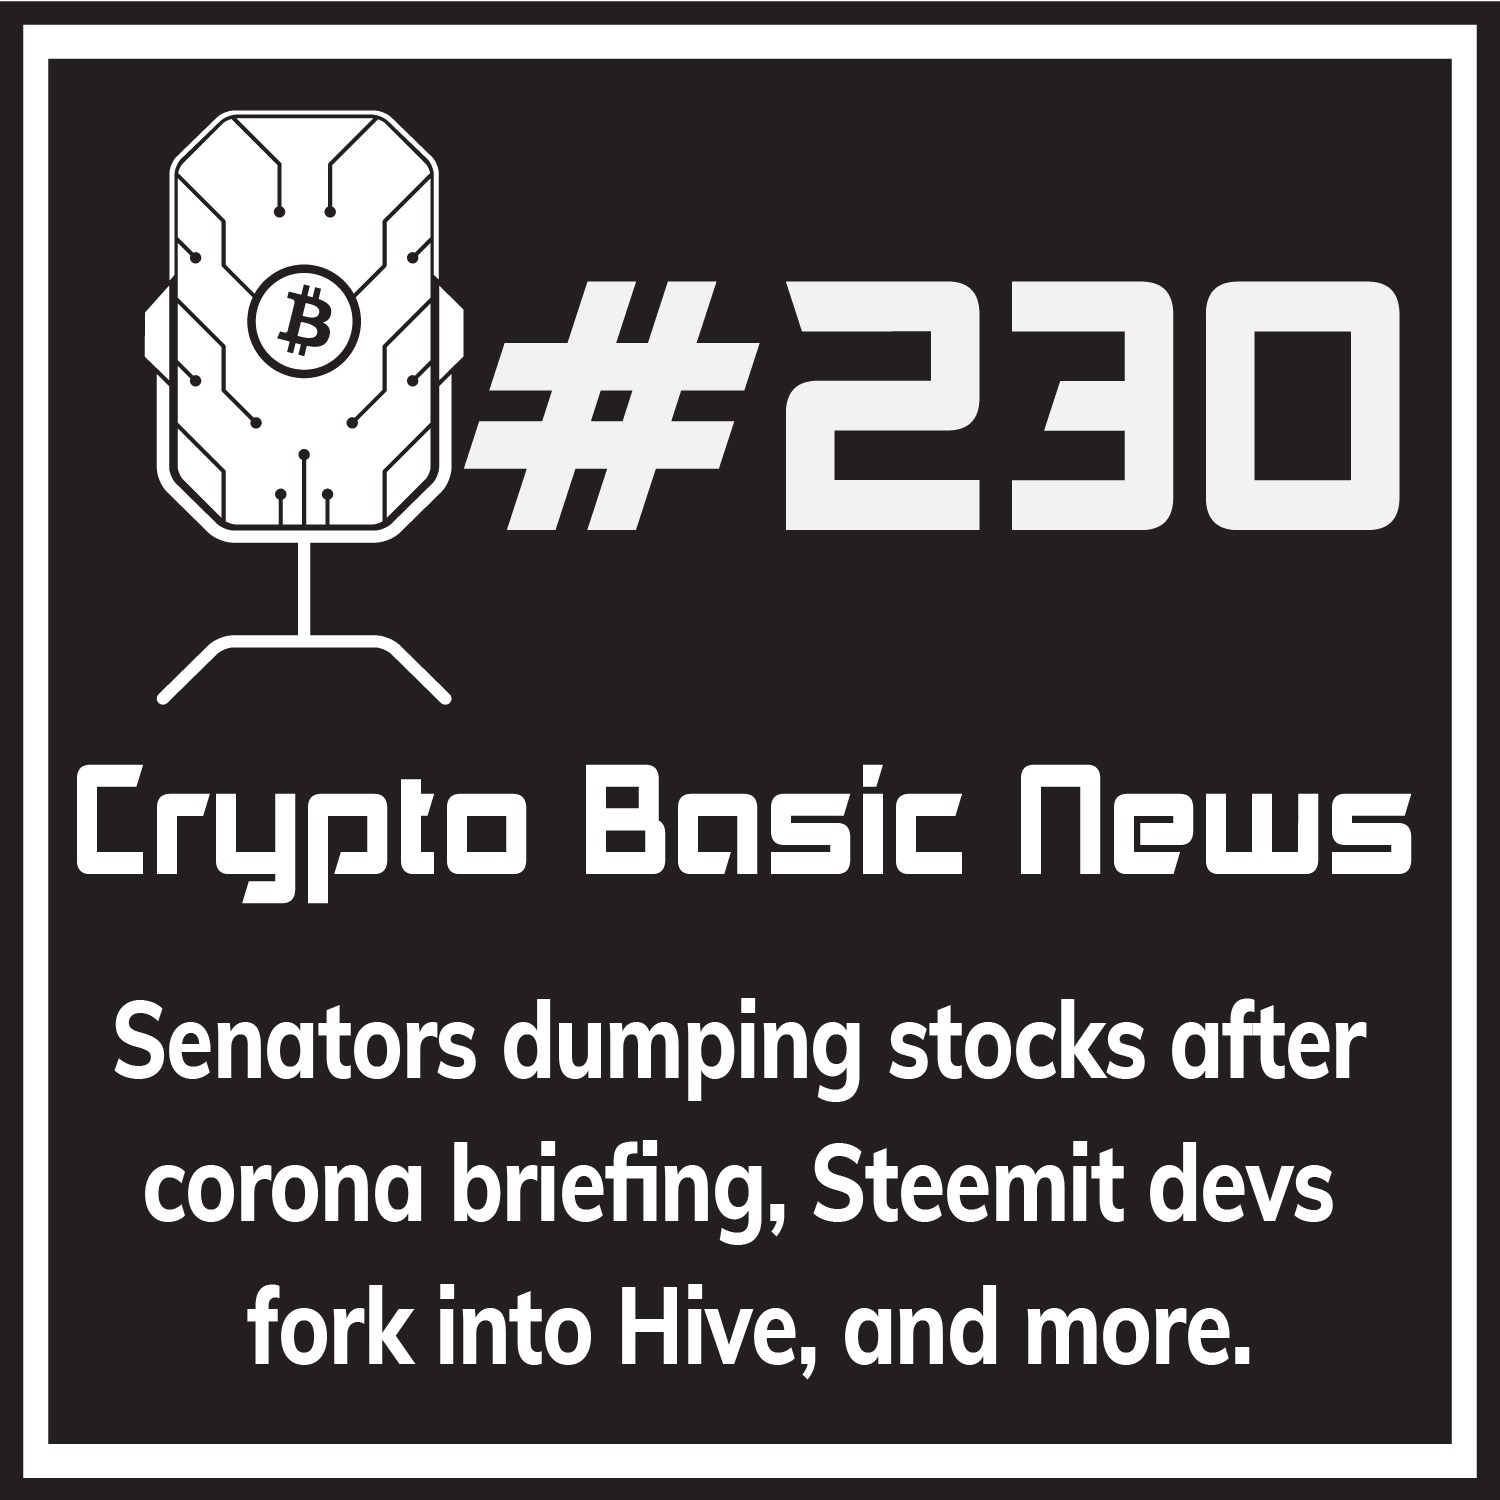 Episode 230 - Senators dumping stocks after corona briefing, Steemit devs fork into Hive, and more.